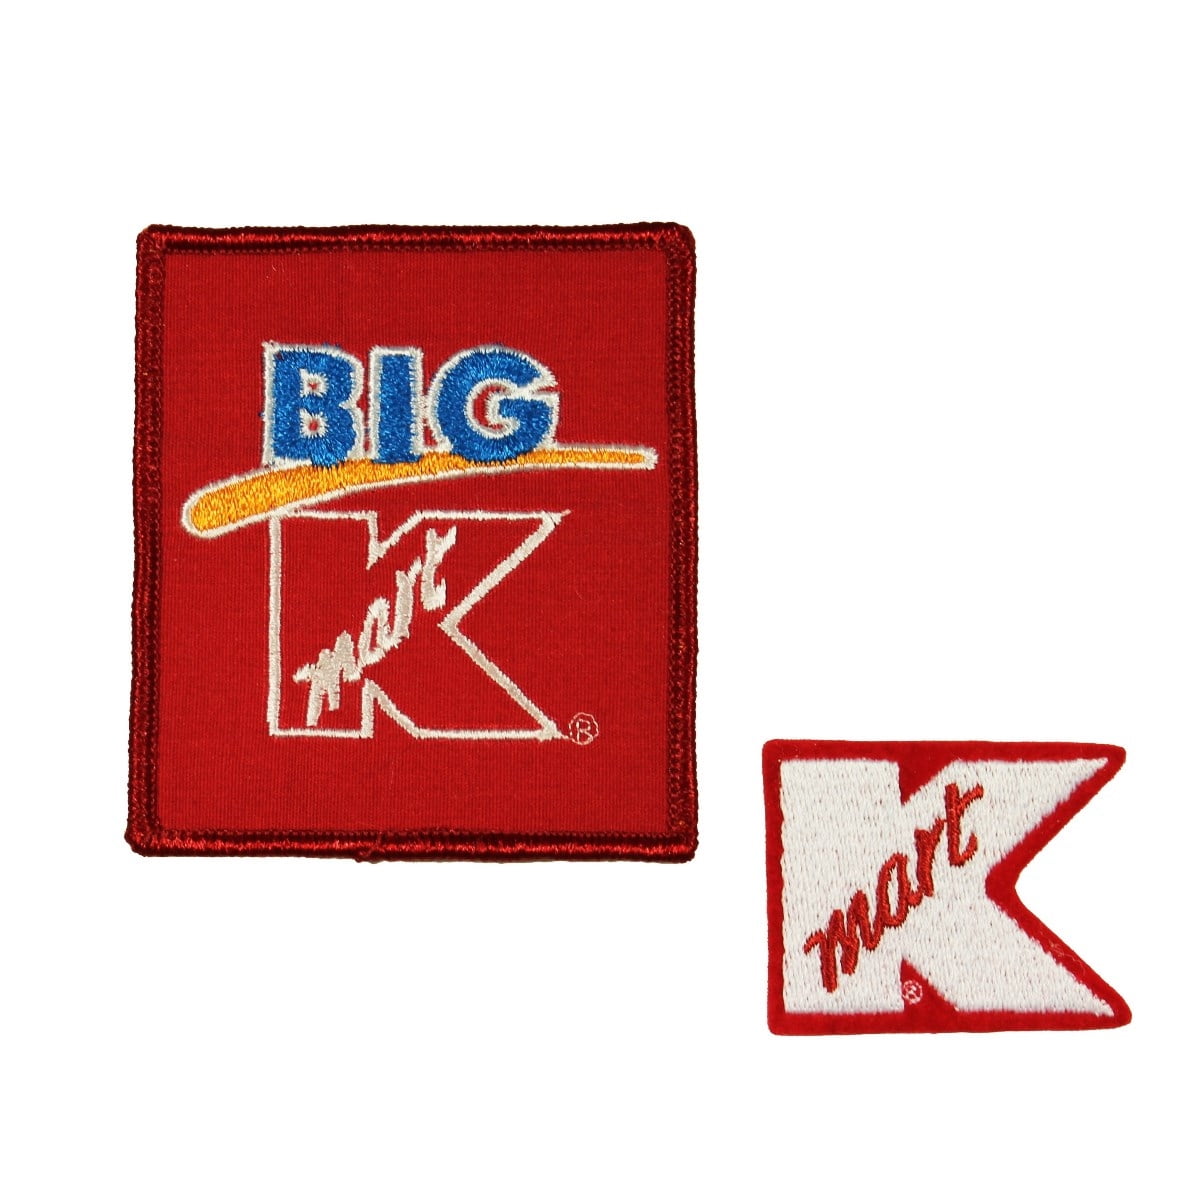 Big K Kmart Badge Patch Uniform Employee Tag Embroidered Sew On Applique